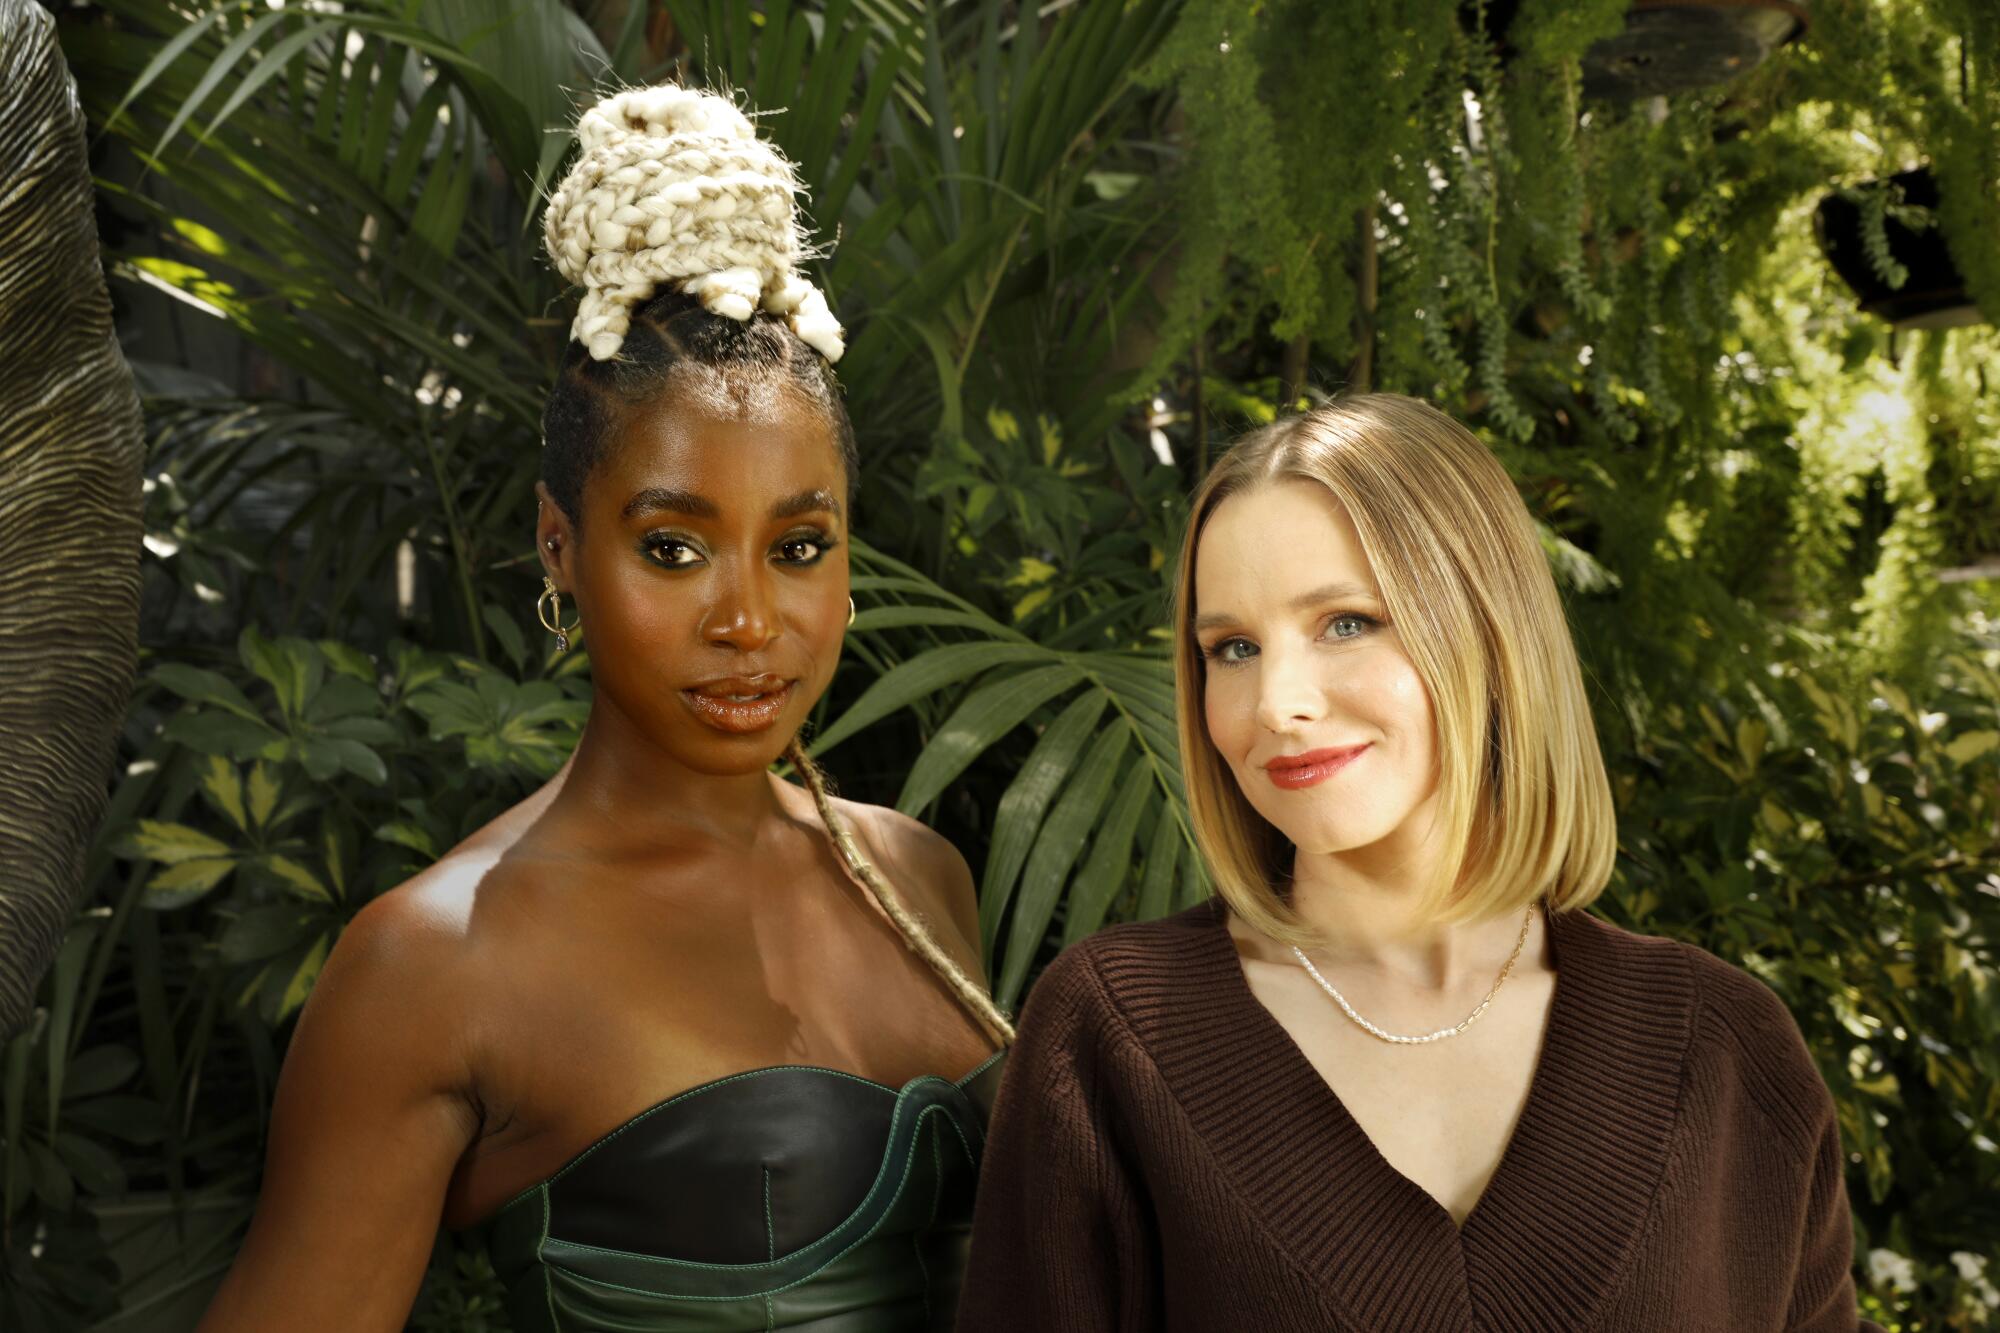 Actresses Kirby Howell-Baptiste and Kristen Bell against a background of tropical plants